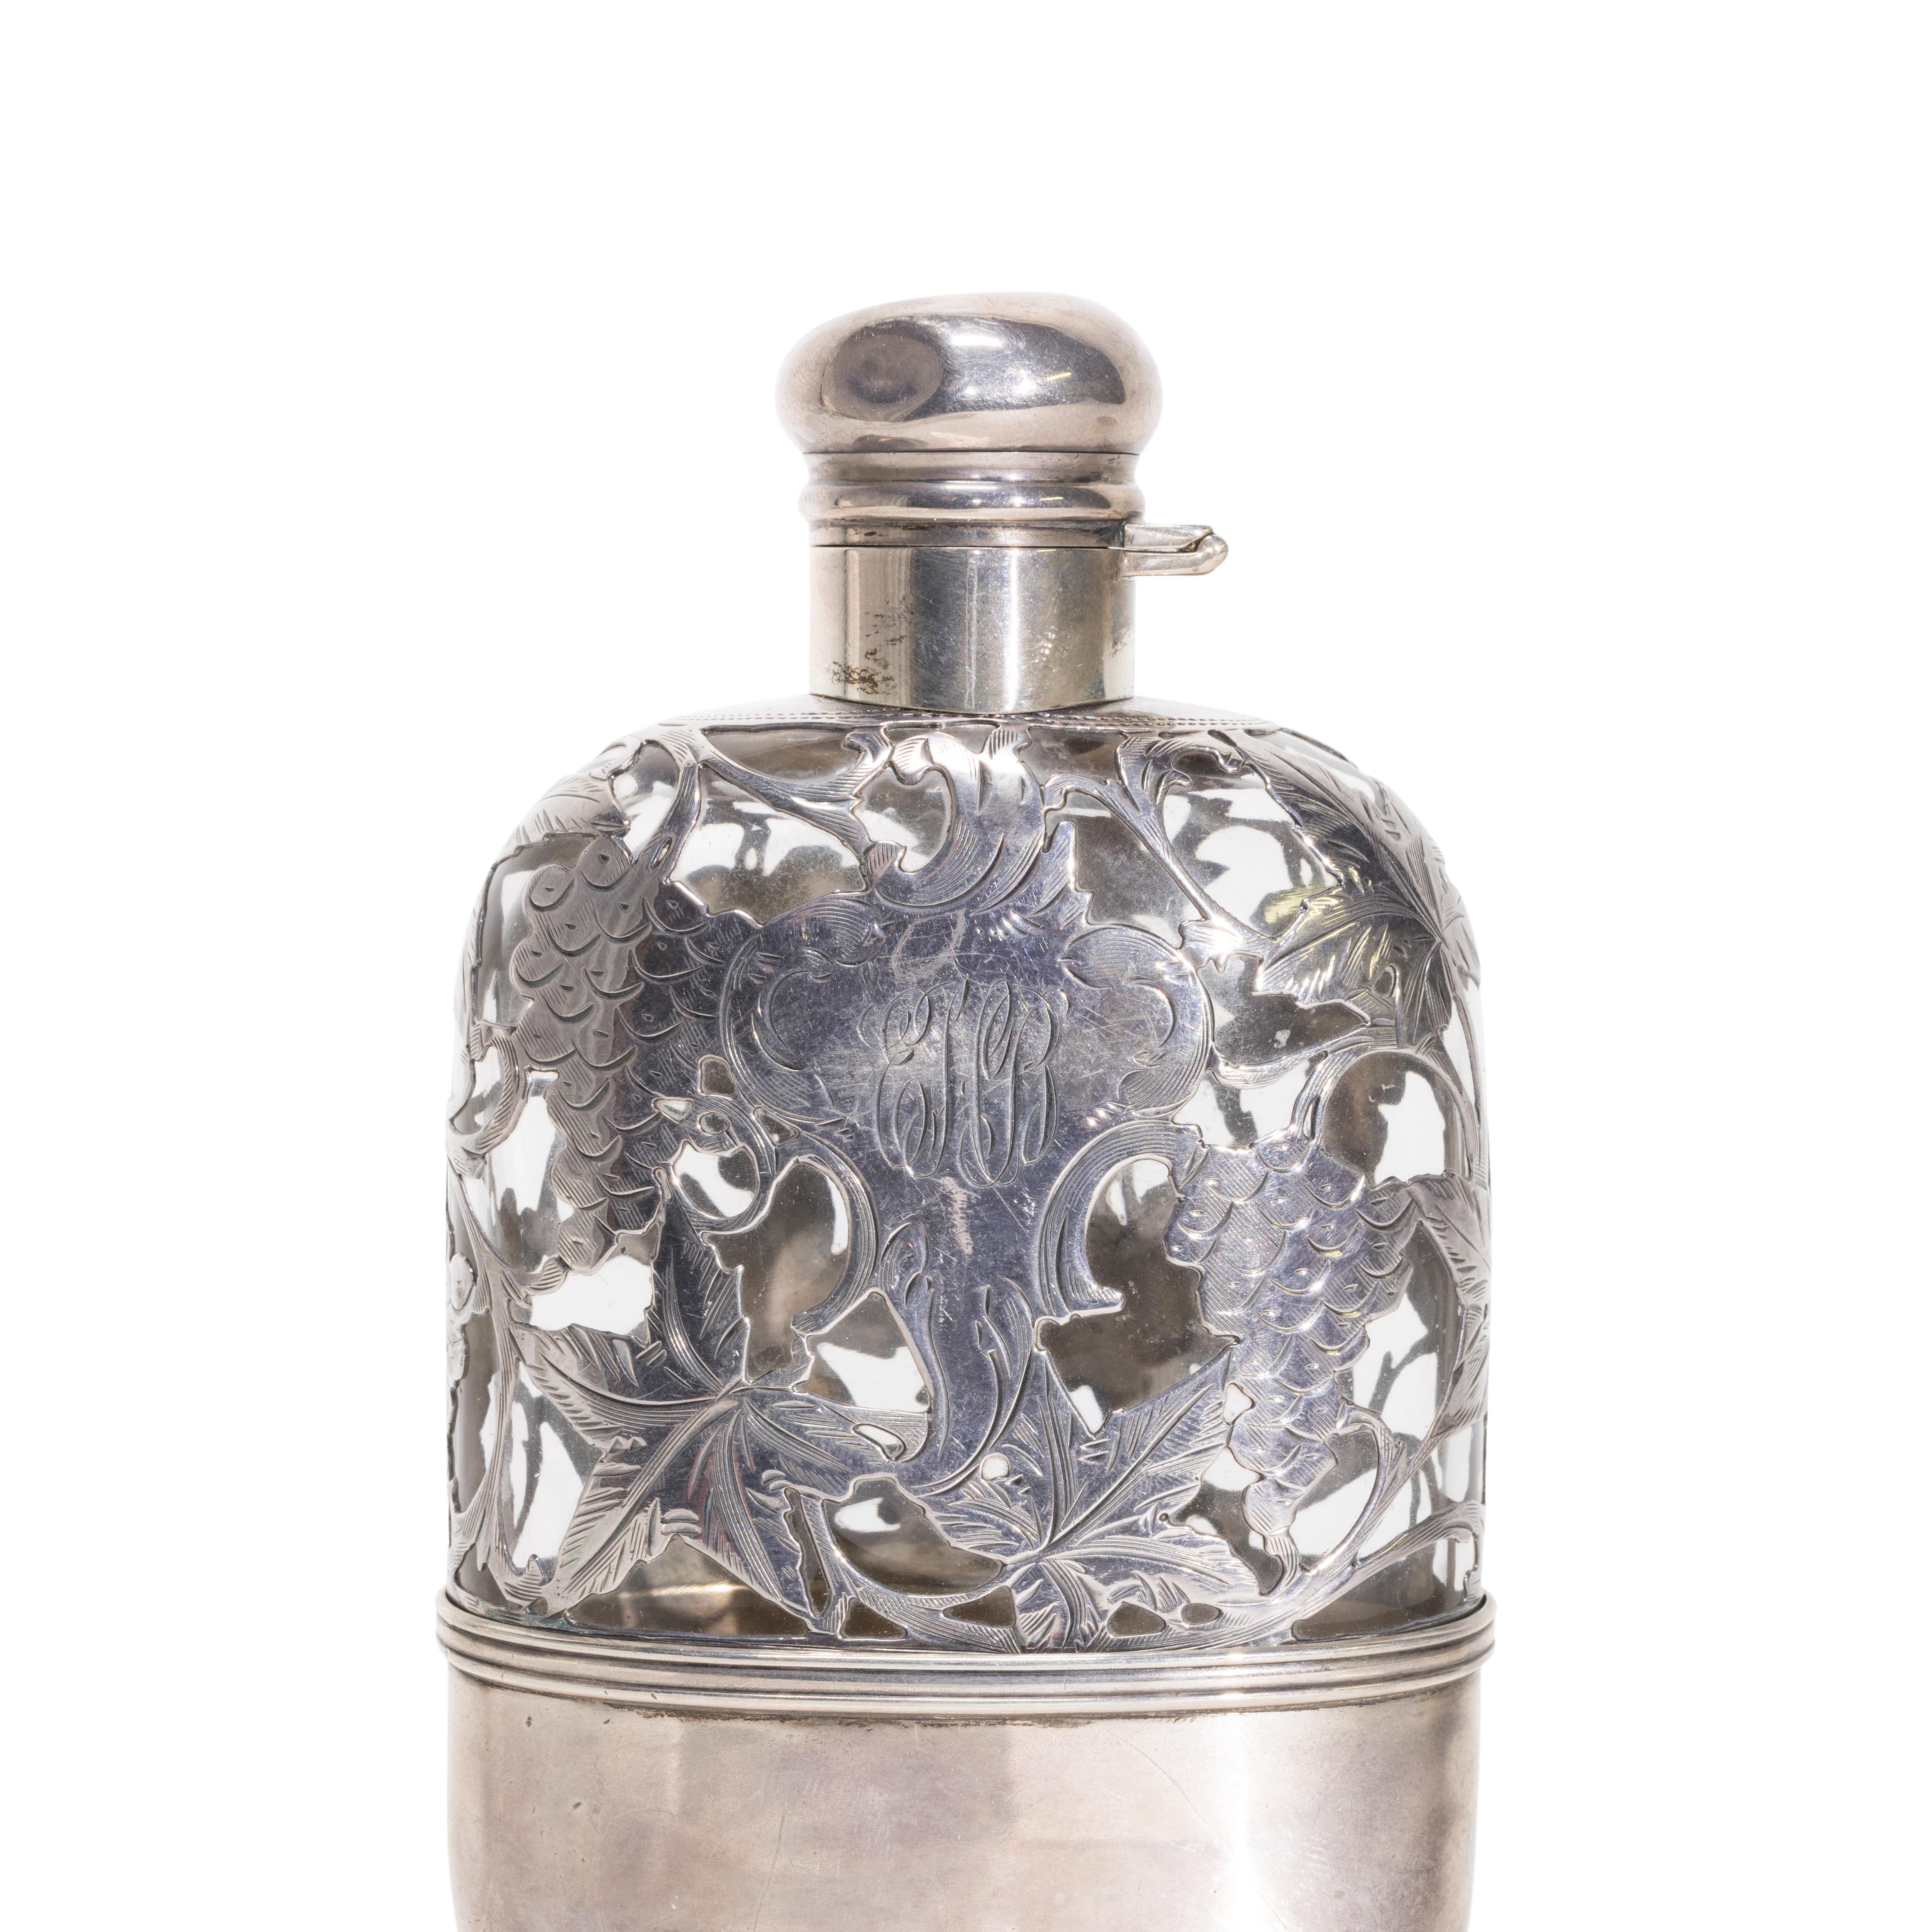 Sterling covered glass flask with grape and vine motif. Bottom marked Sterling, 1 Pint, Serial #4123 and maker's hallmark. Hinged screw on lid.

PERIOD: 19th Century

ORIGIN: England, Europe

SIZE: 6